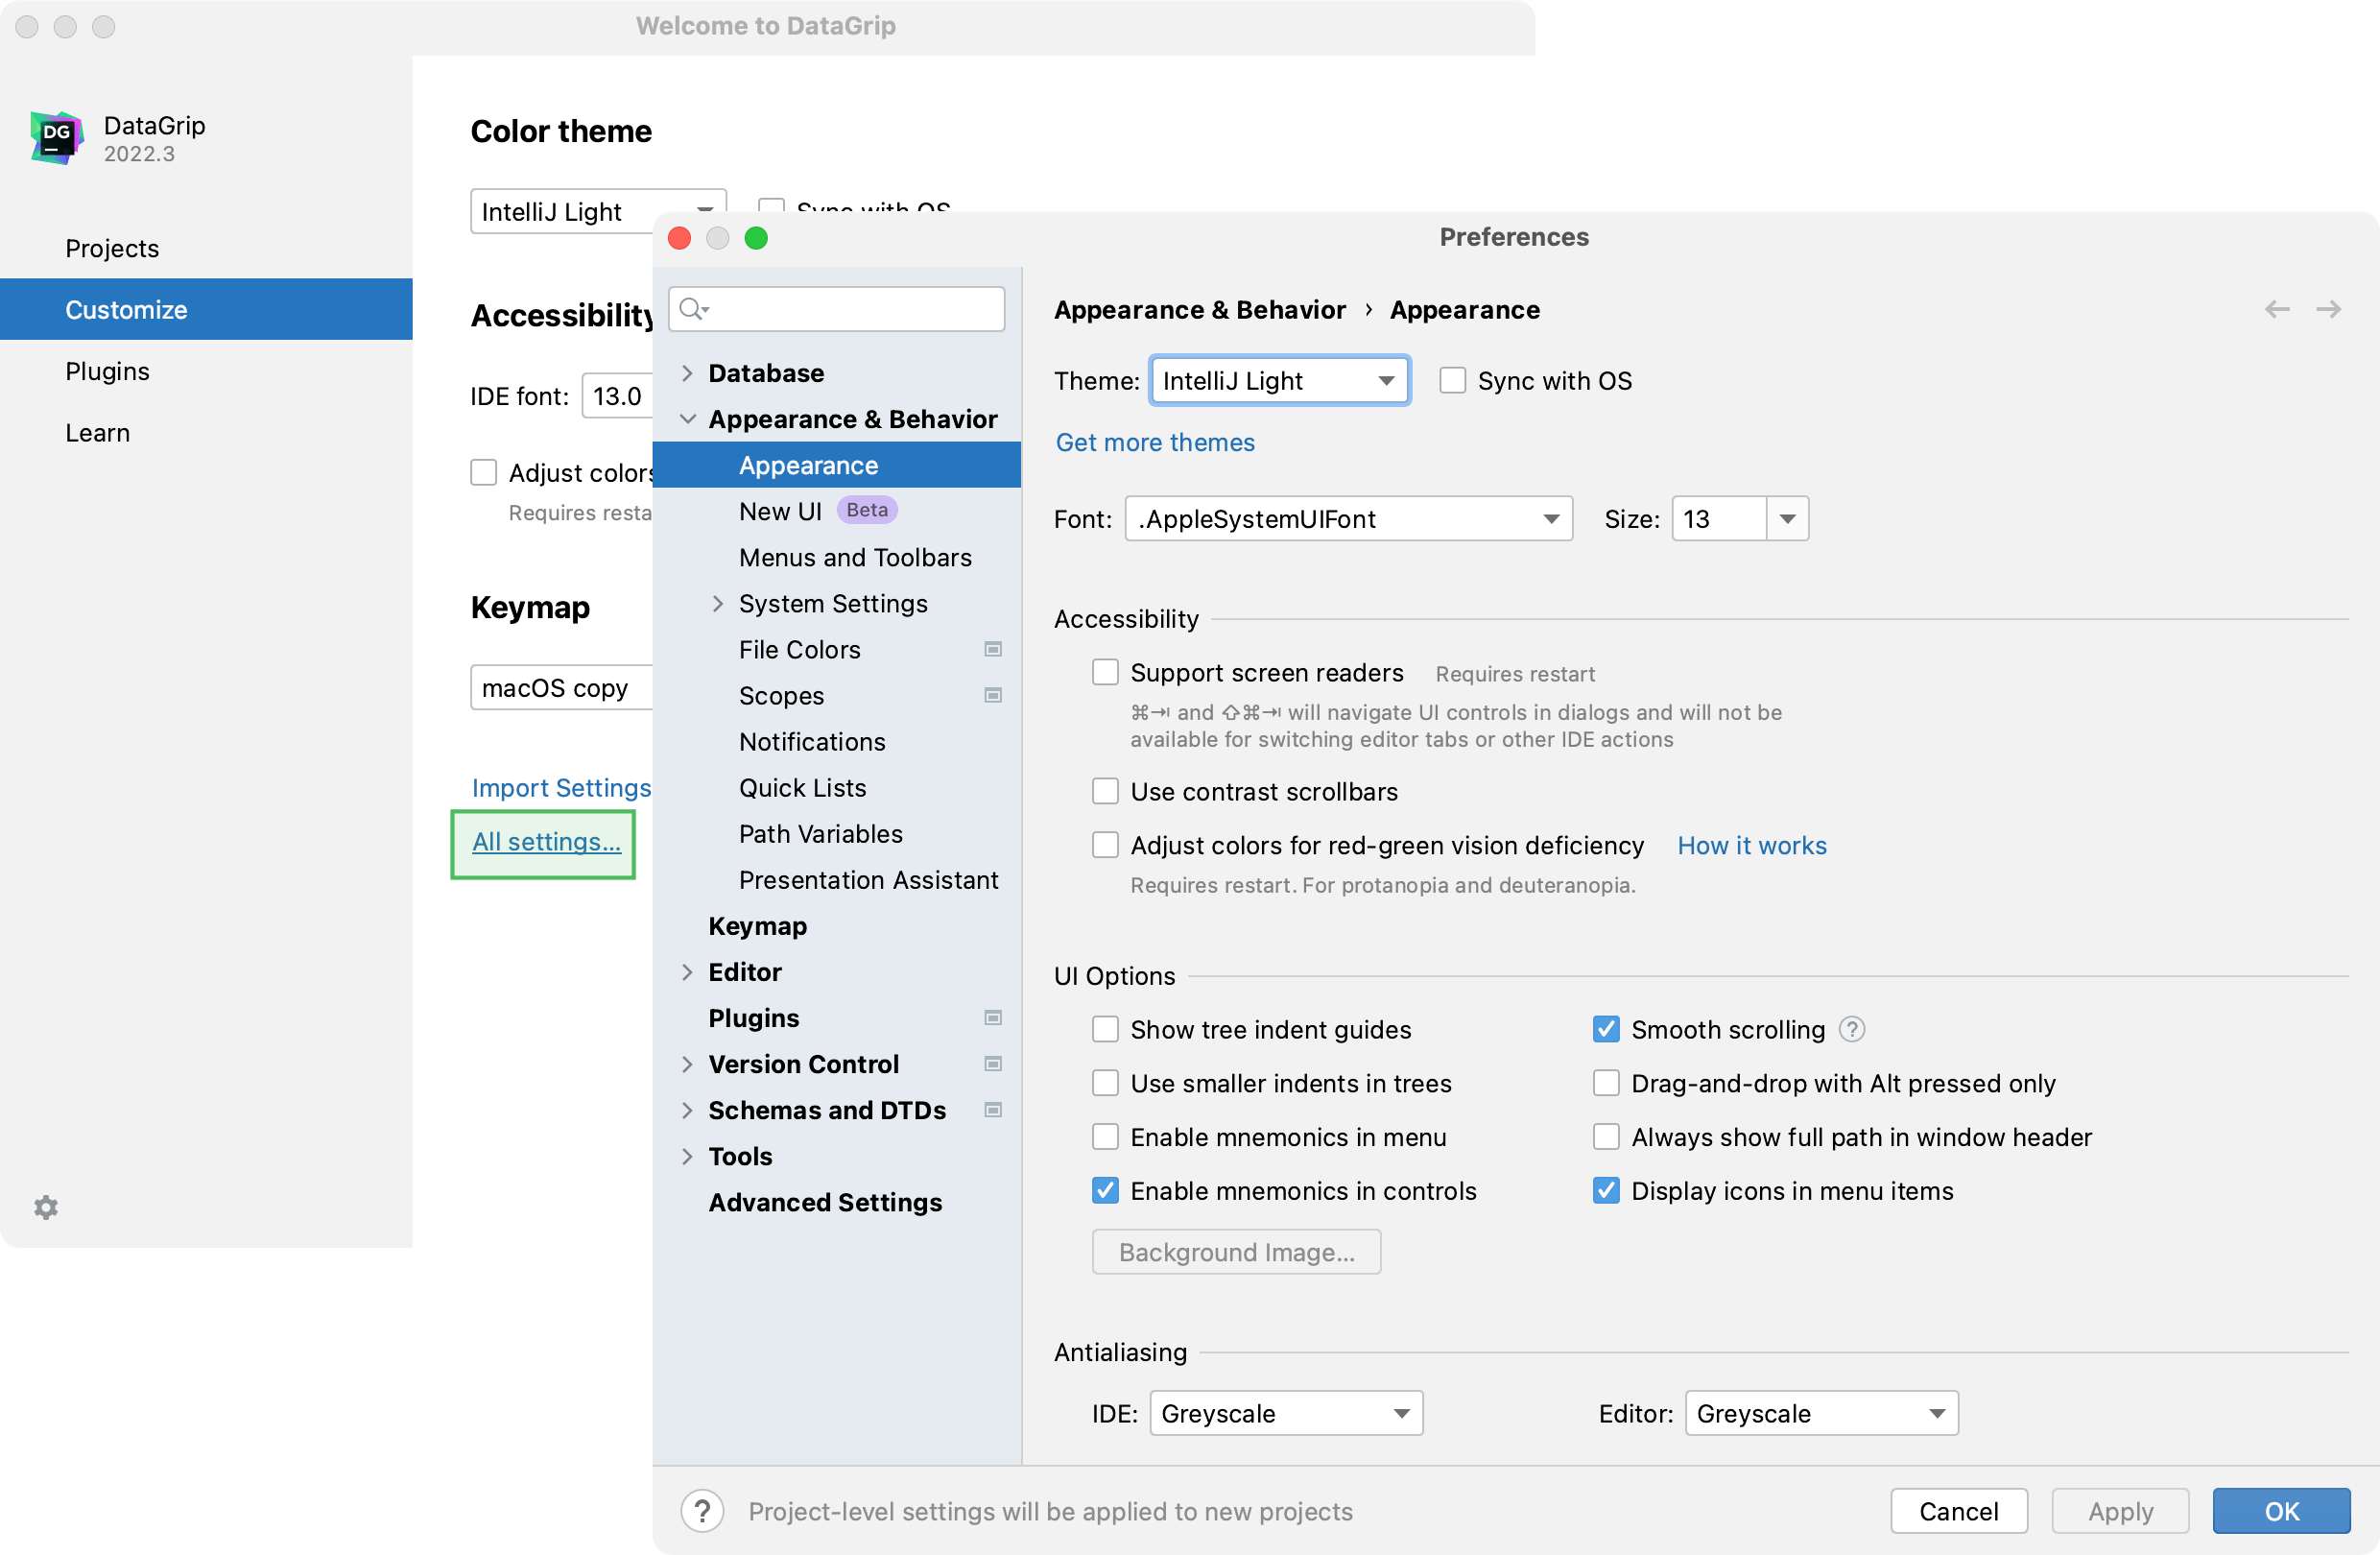 Configuring new default settings for projects